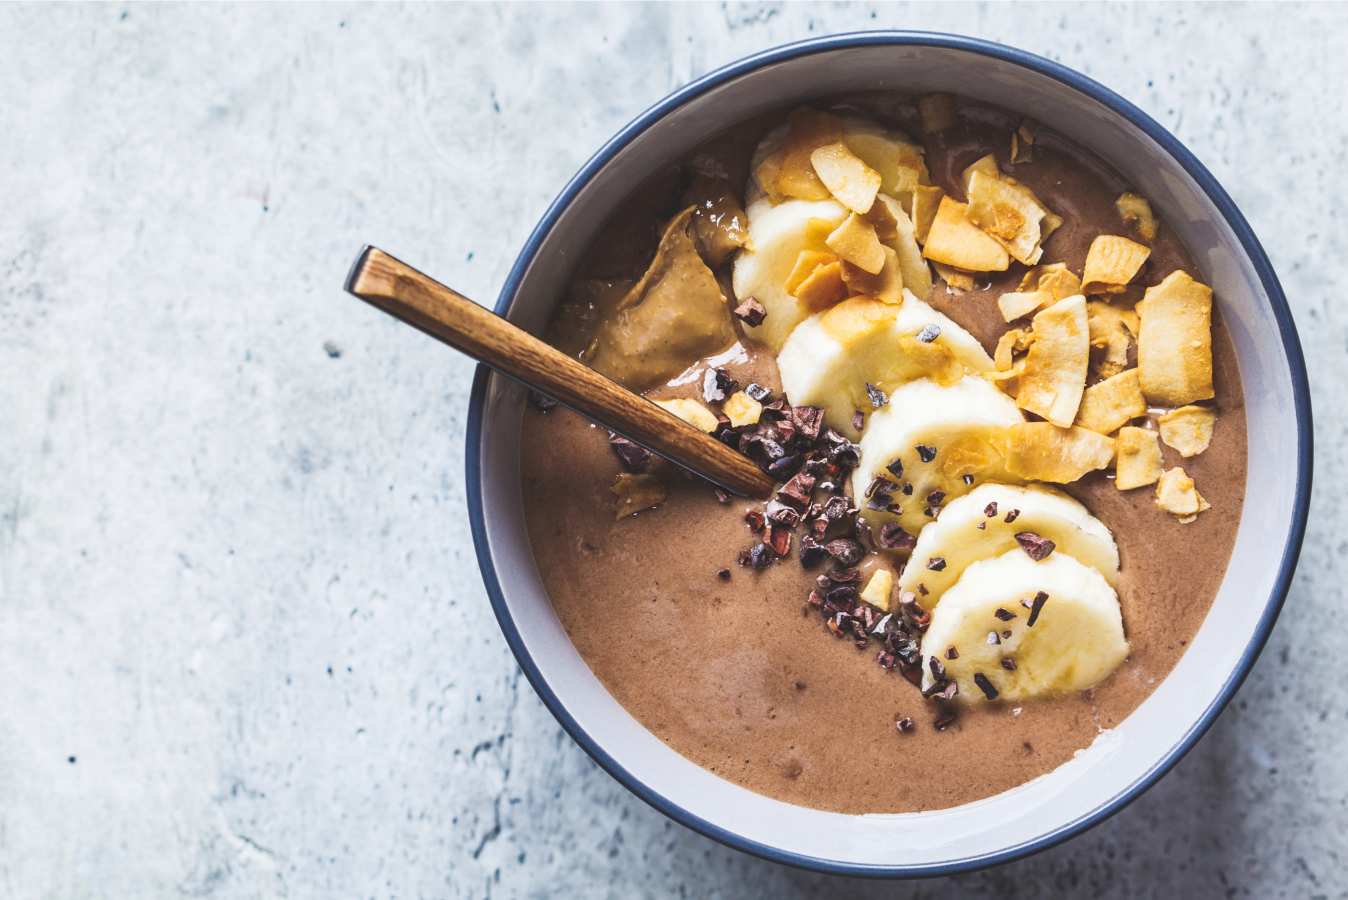 Delicious Chocolate Smoothie Bowl Made With Hemp Yeah Chocolate Max Fiber Protein Powder Topped With Coconut Banana Coins Nut Butter And Cocoa Nibs From Terra Powders